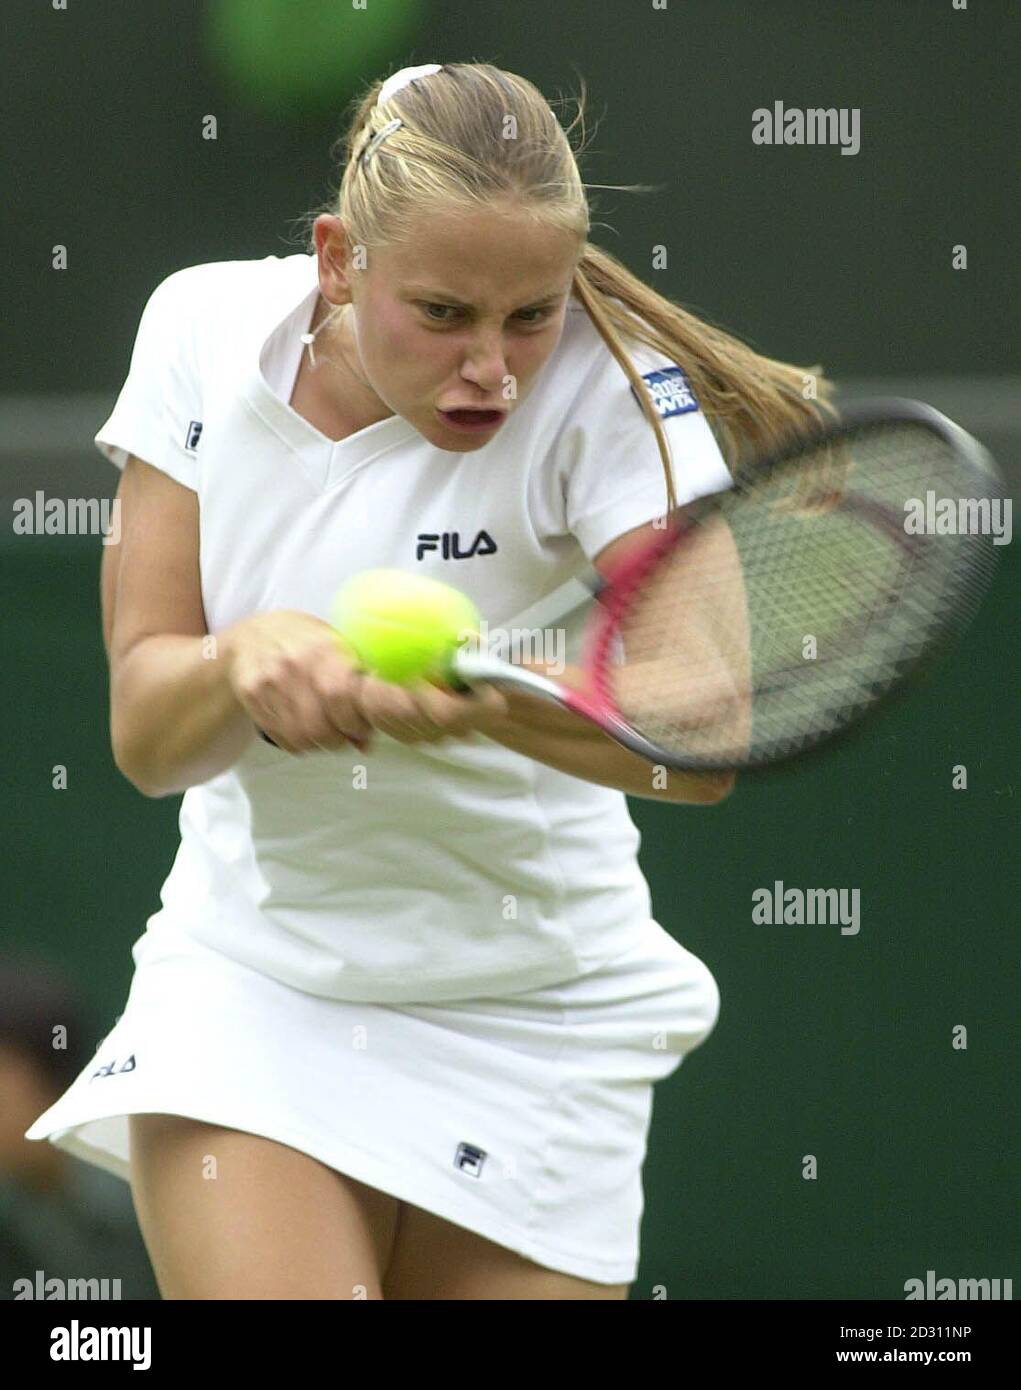 NO COMMERCIAL USE: Australia's Jelena Dokic in action against Magui Serna of Spain during the Lawn Tennis Championships at Wimbledon. Stock Photo